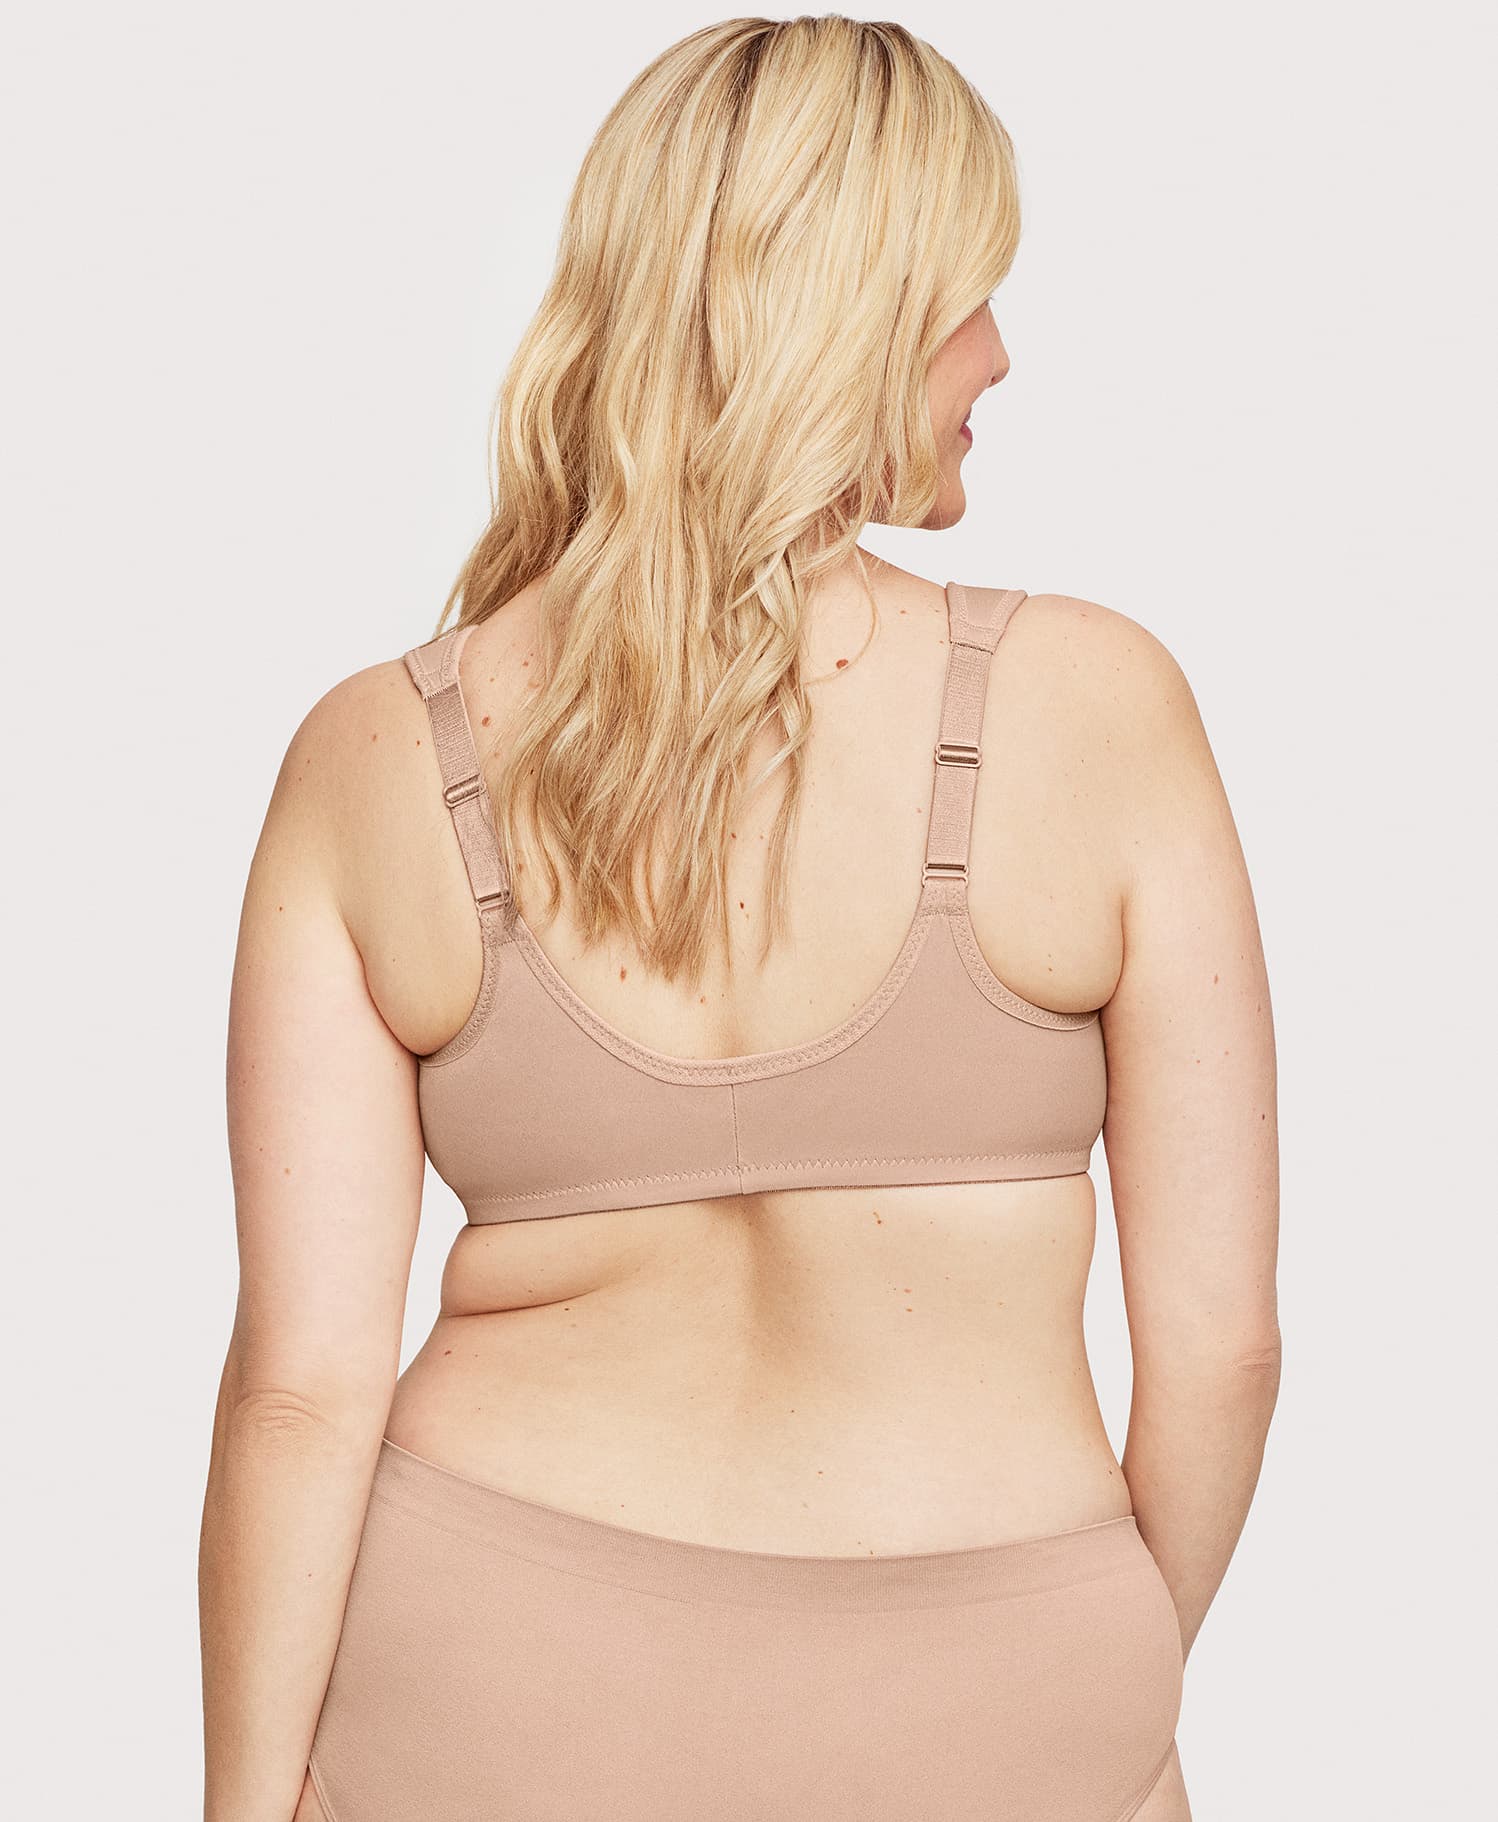 Full Coverage Pull-On Closure Plus Size Bra, Shop Today. Get it Tomorrow!